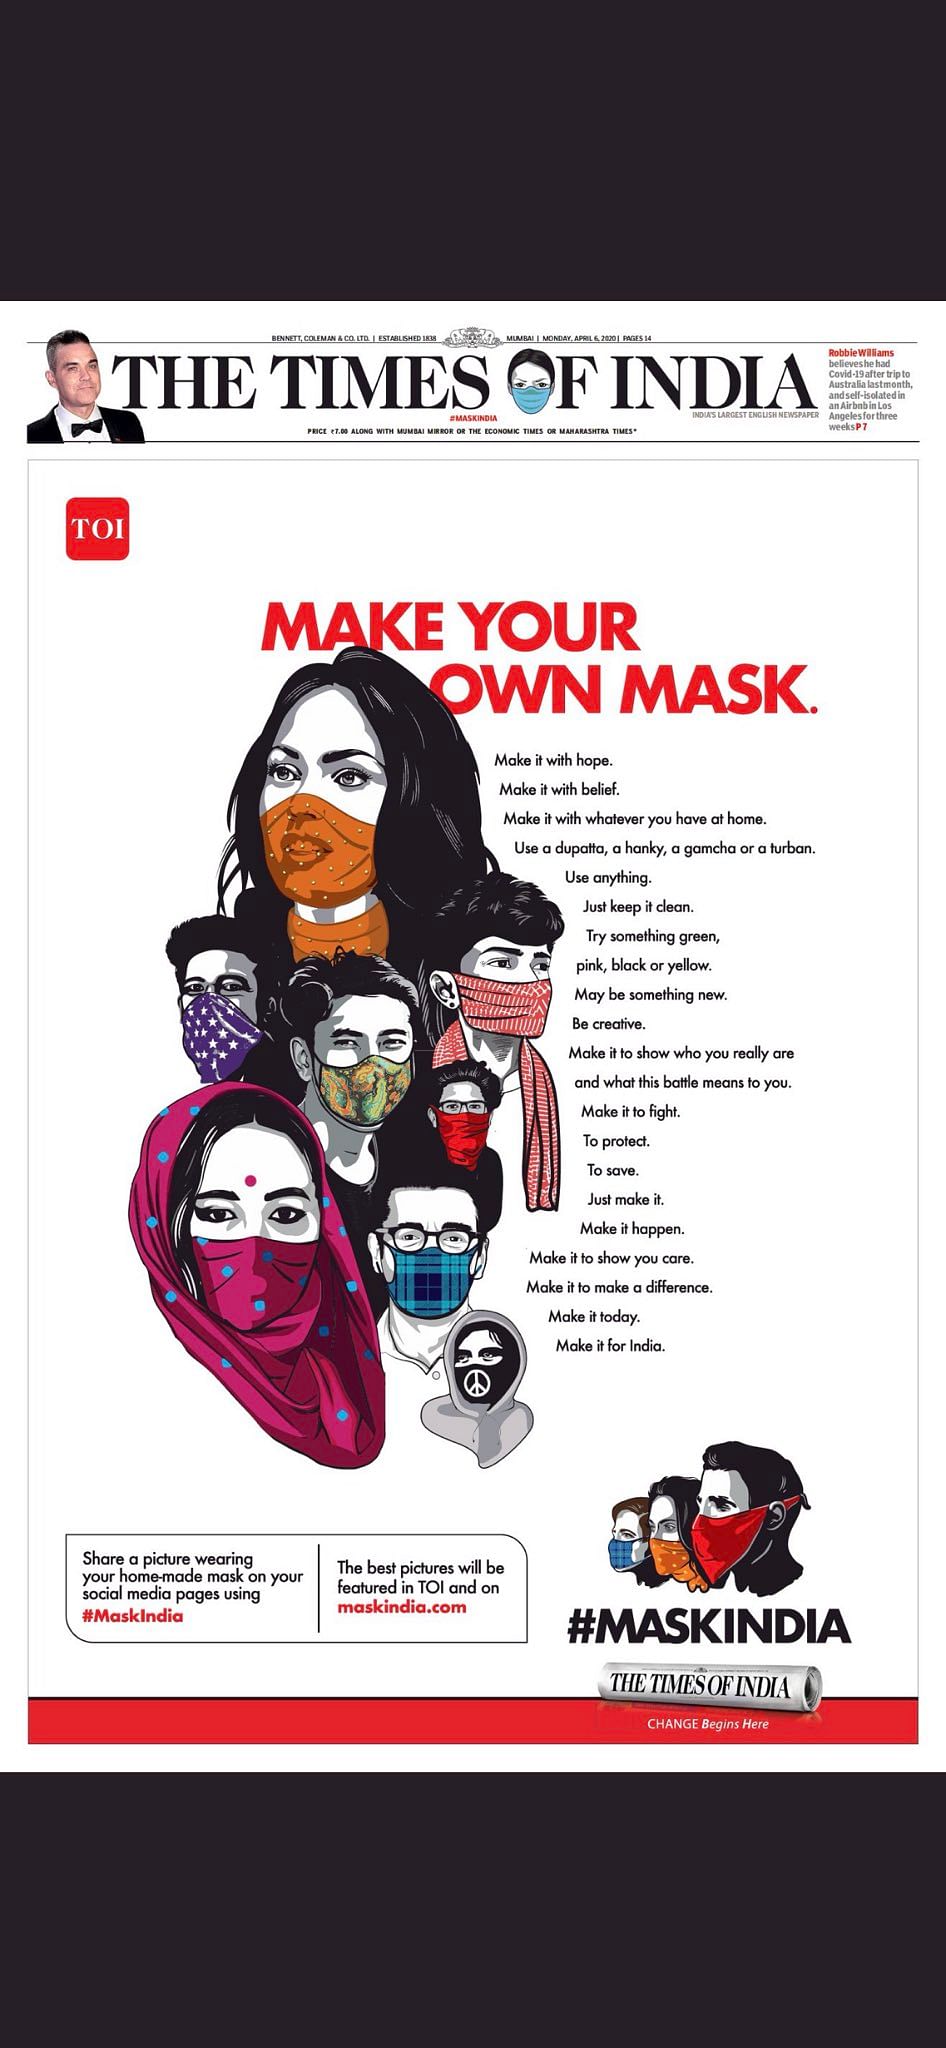 The Times of India encourages people to make their own face masks... 